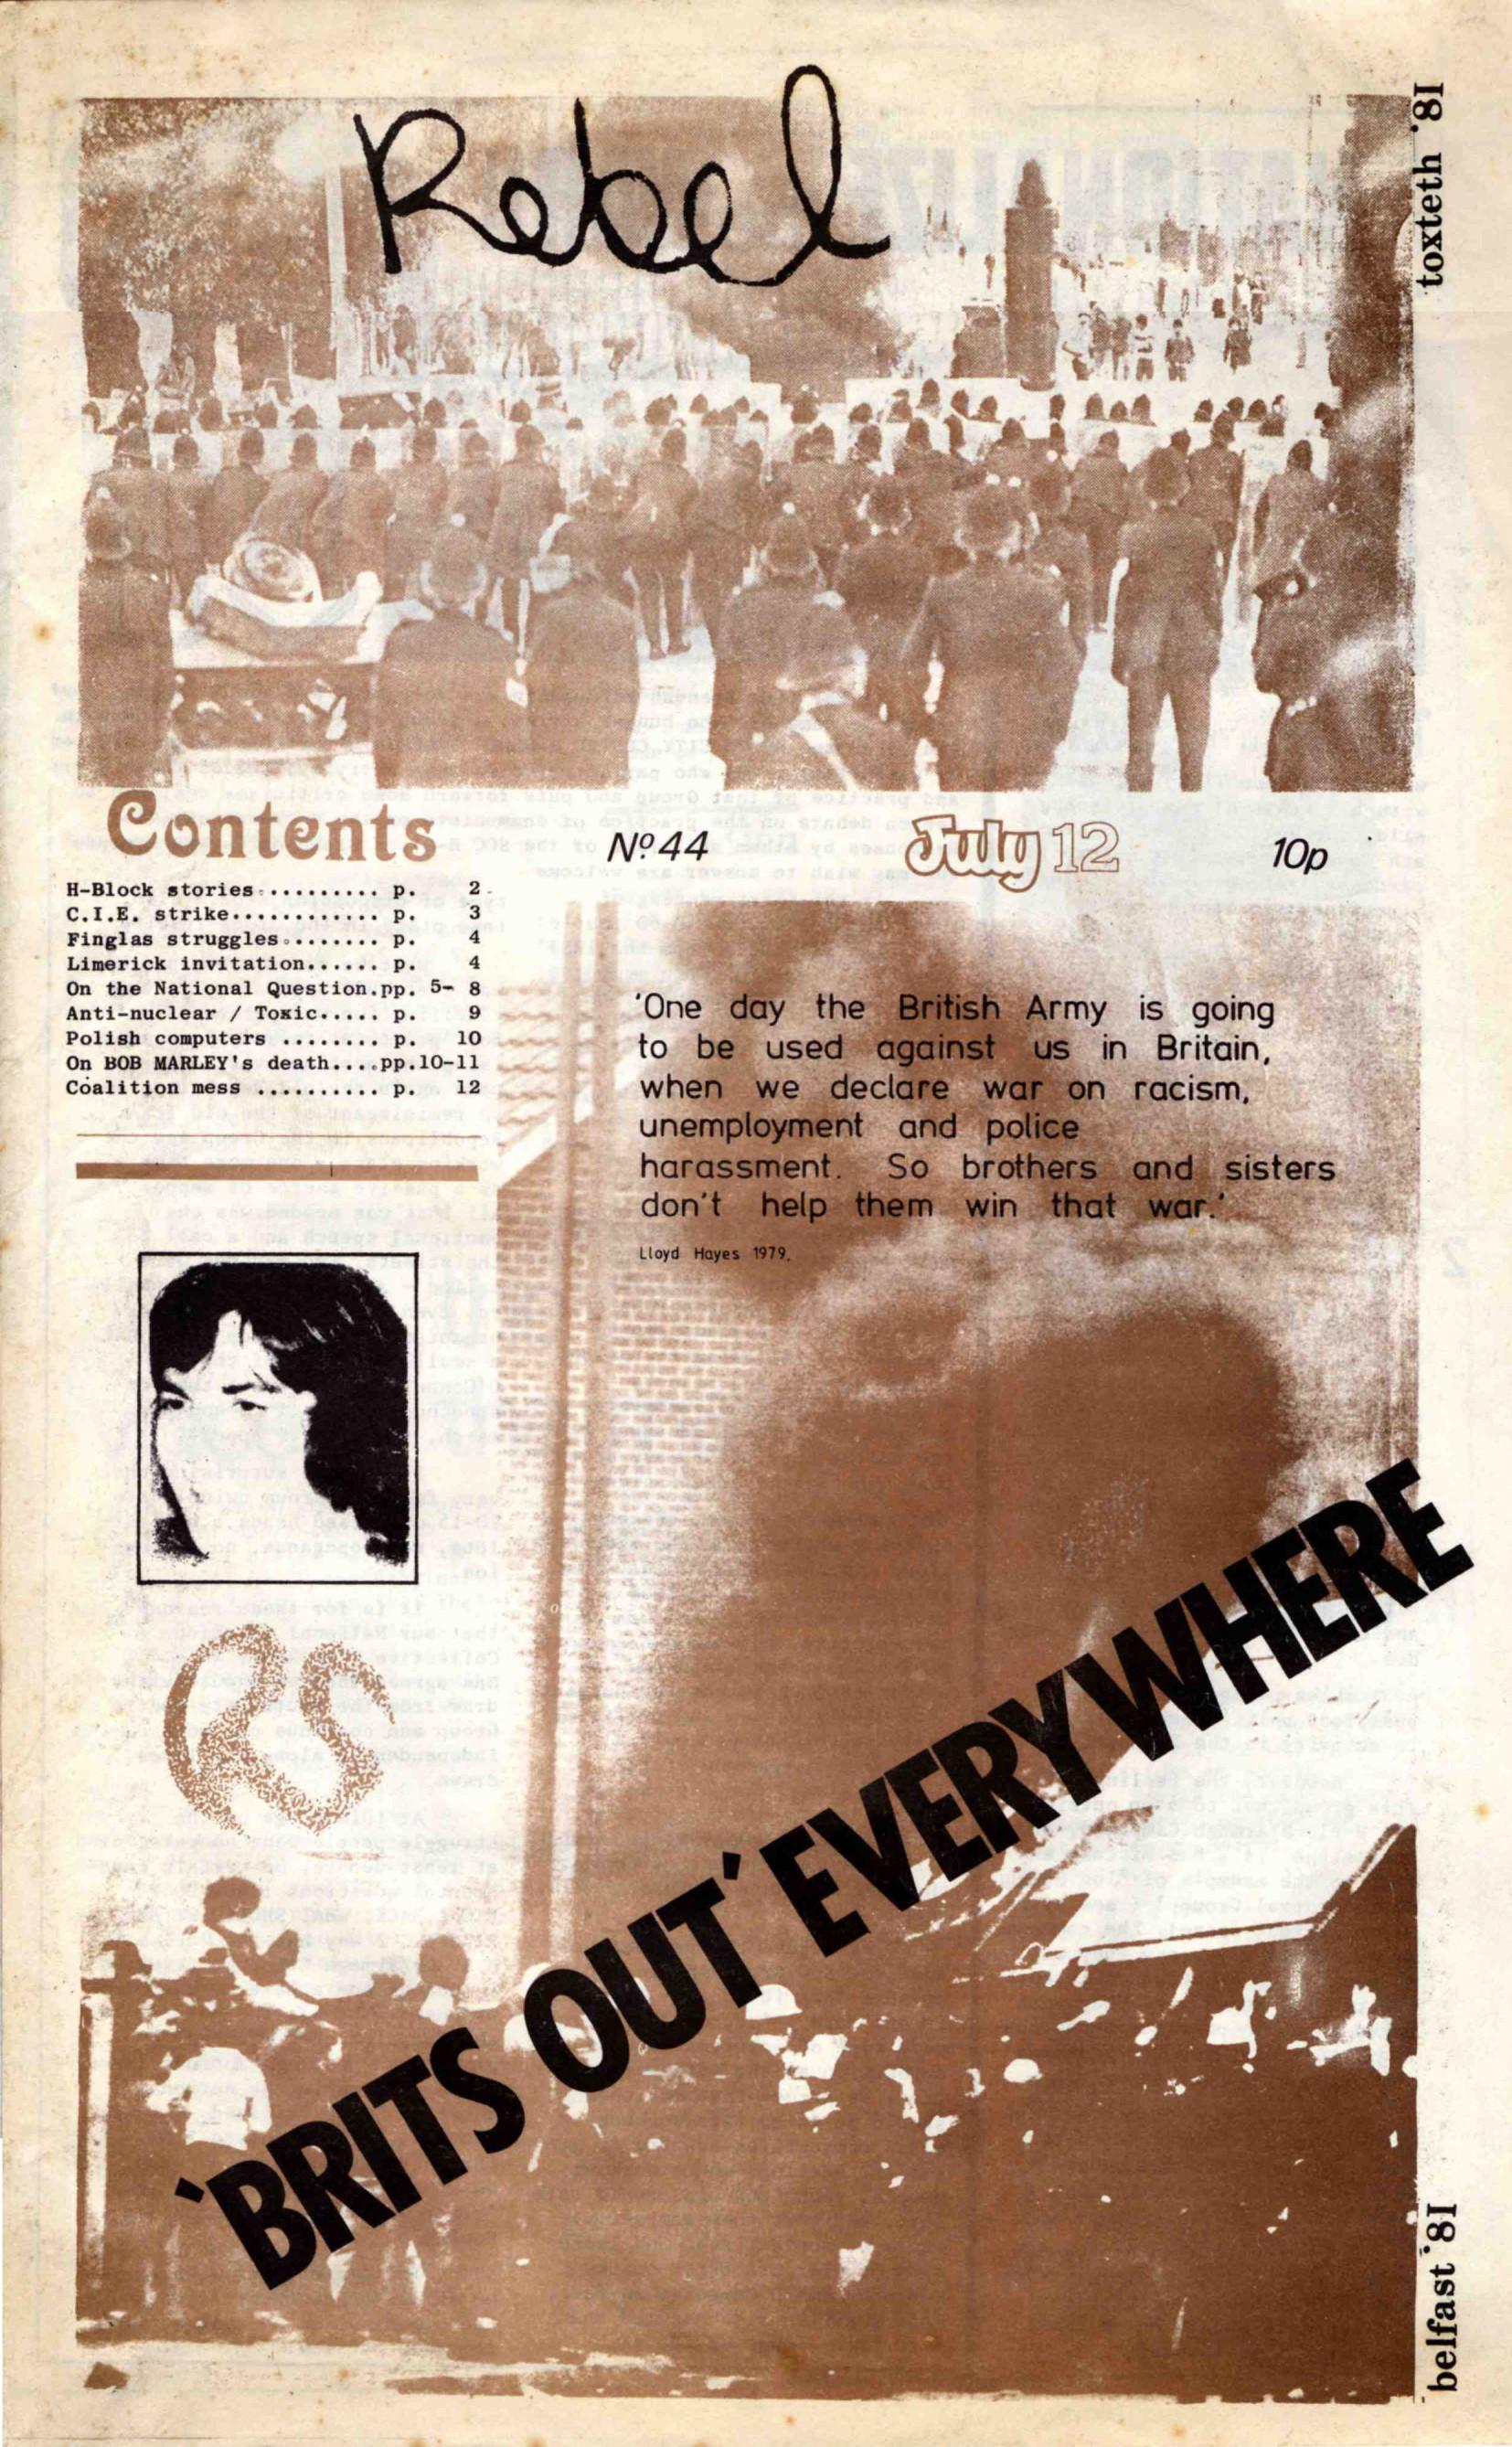 The front cover of Rebel, No. 44, with the headline 'Brits out everywhere'.